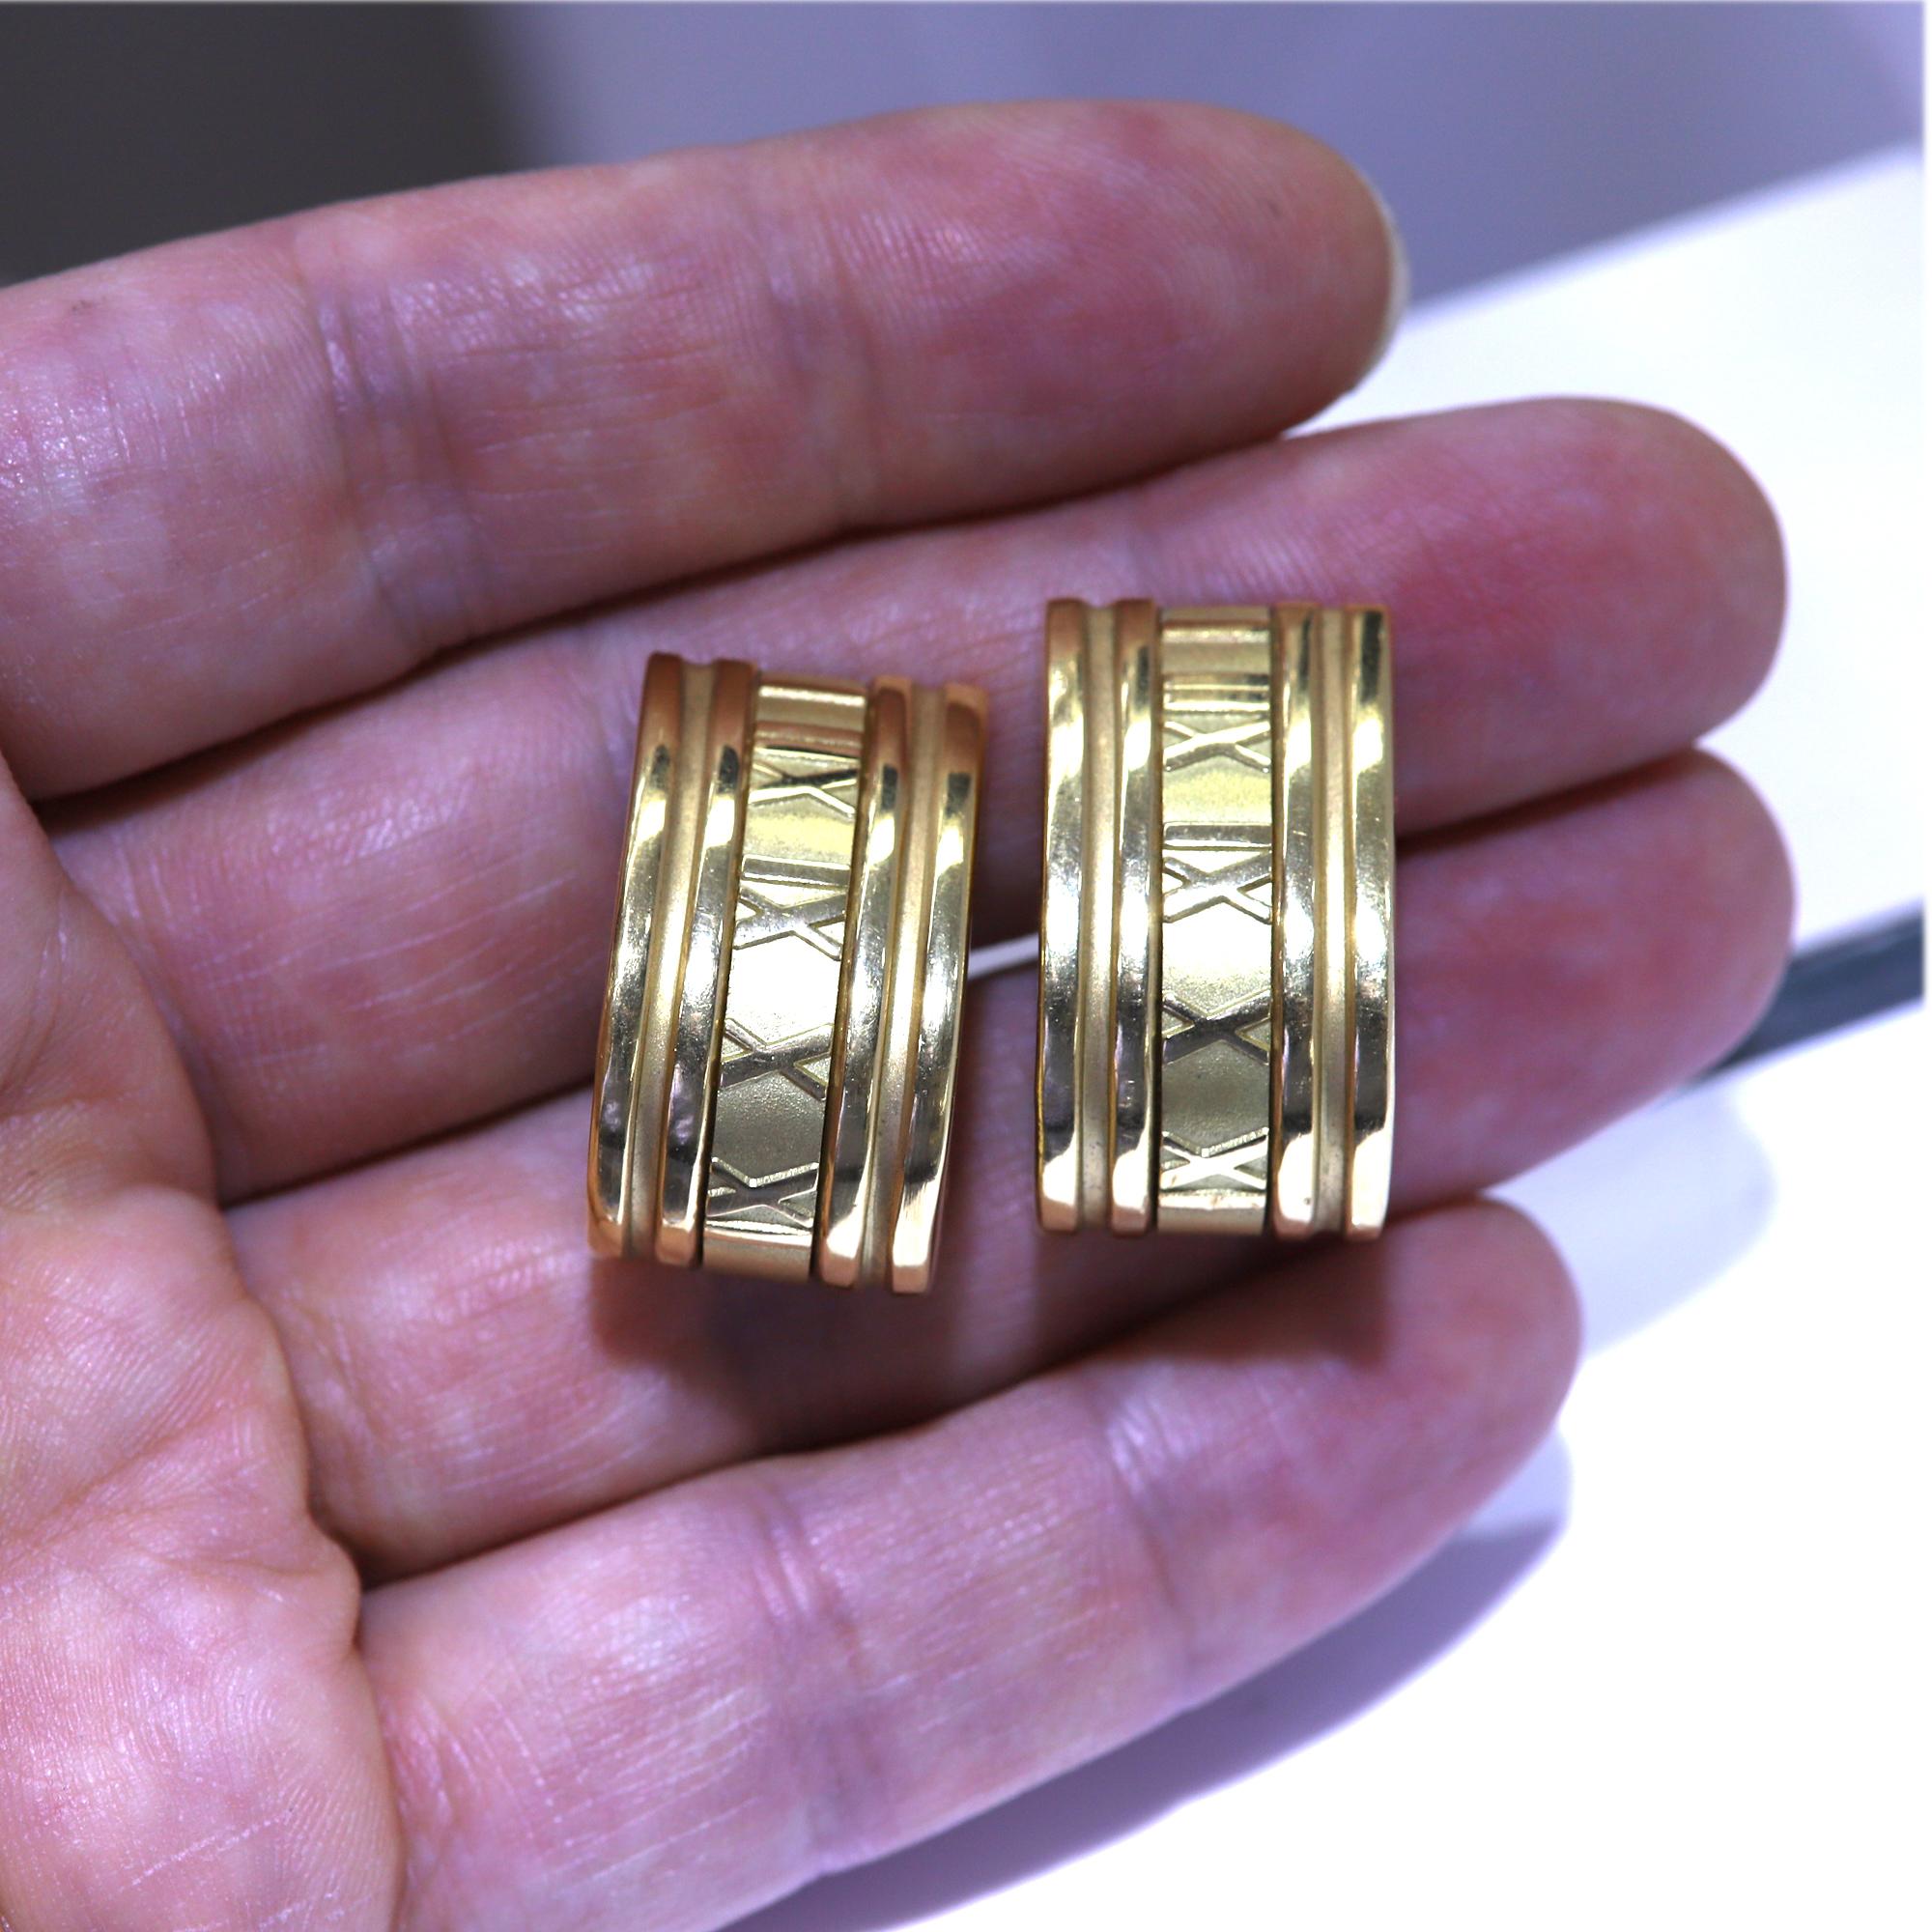 Roman Numericals design
Original Tiffany Earrings from 1995 
18k Yellow Gold  25.0 grams
size: 15 mm wide, approx. 25mm high
Omega type closure
very good condition
(#bij91170091)
